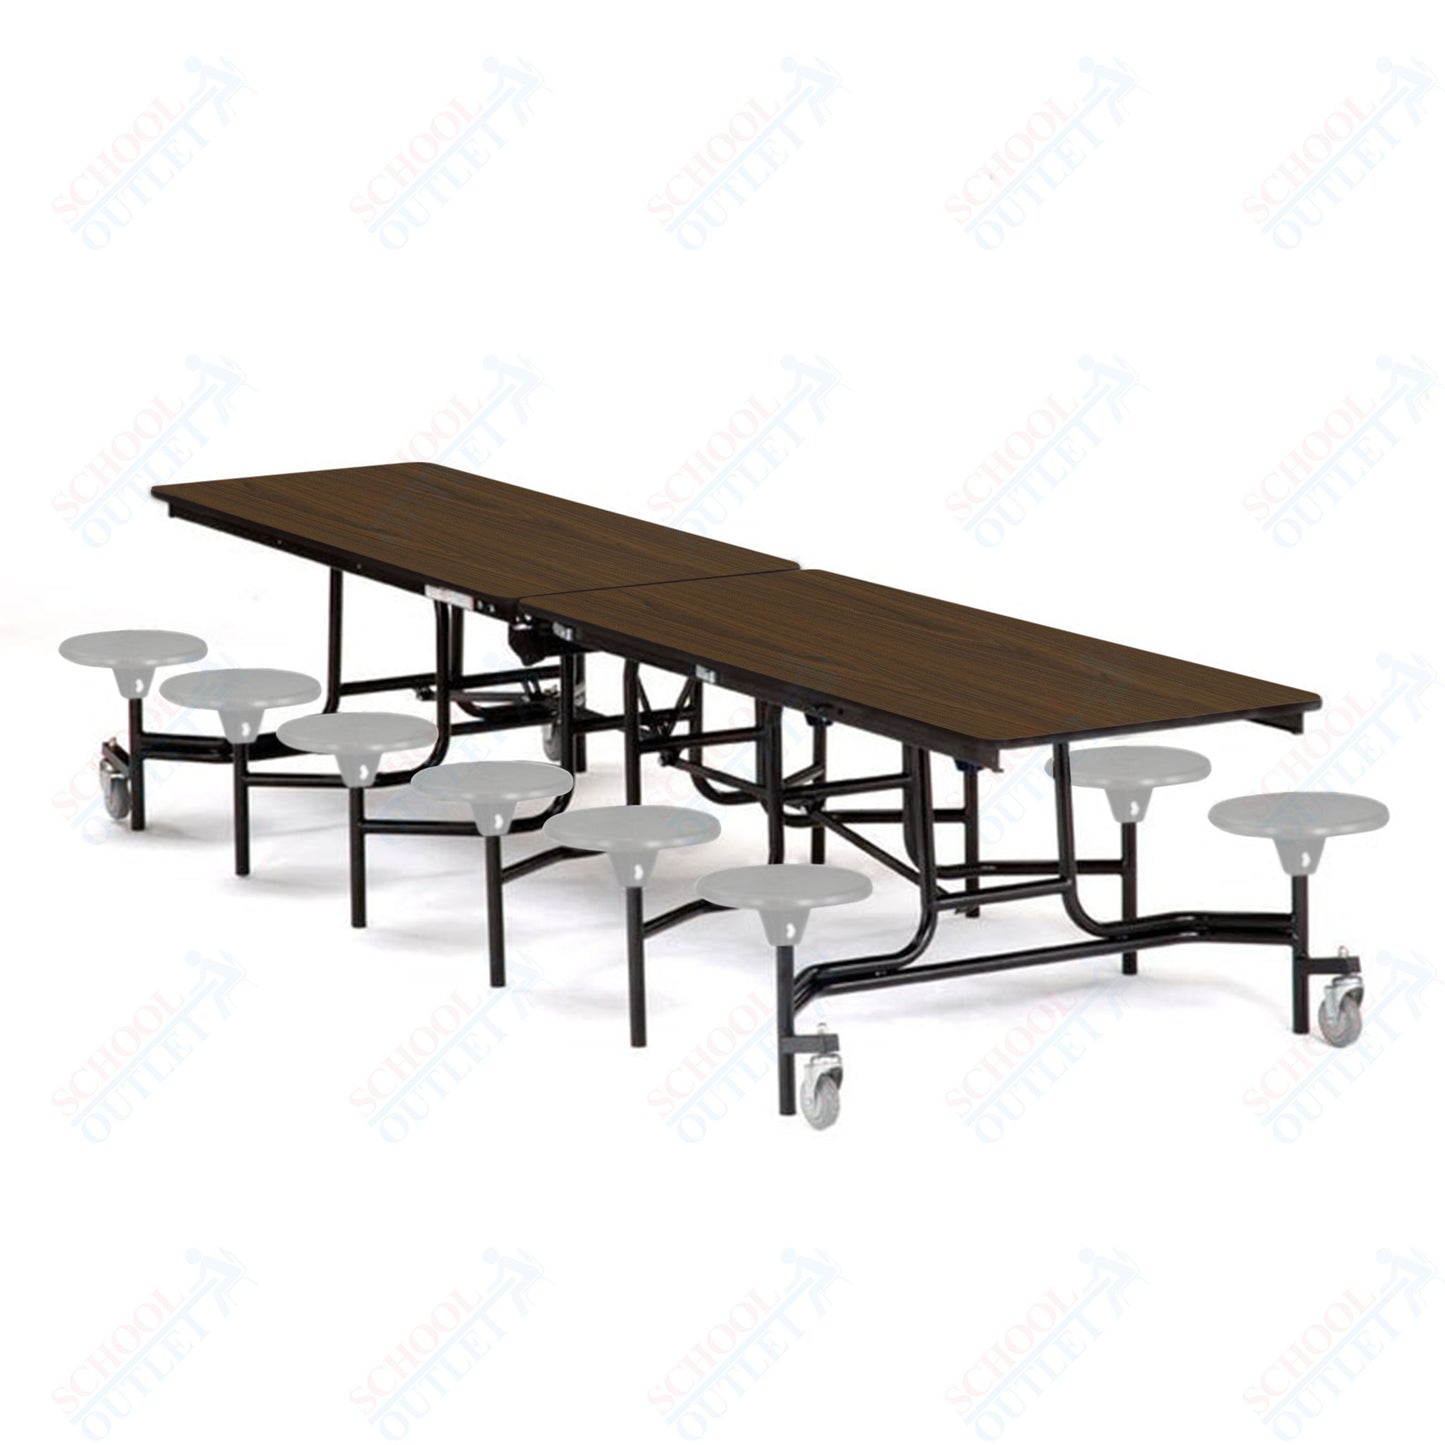 Mobile Cafeteria Lunchroom Stool Table - 30" W x 12' L - 12 Stools - Particleboard Core - T-Molding Edge - Chrome Frame